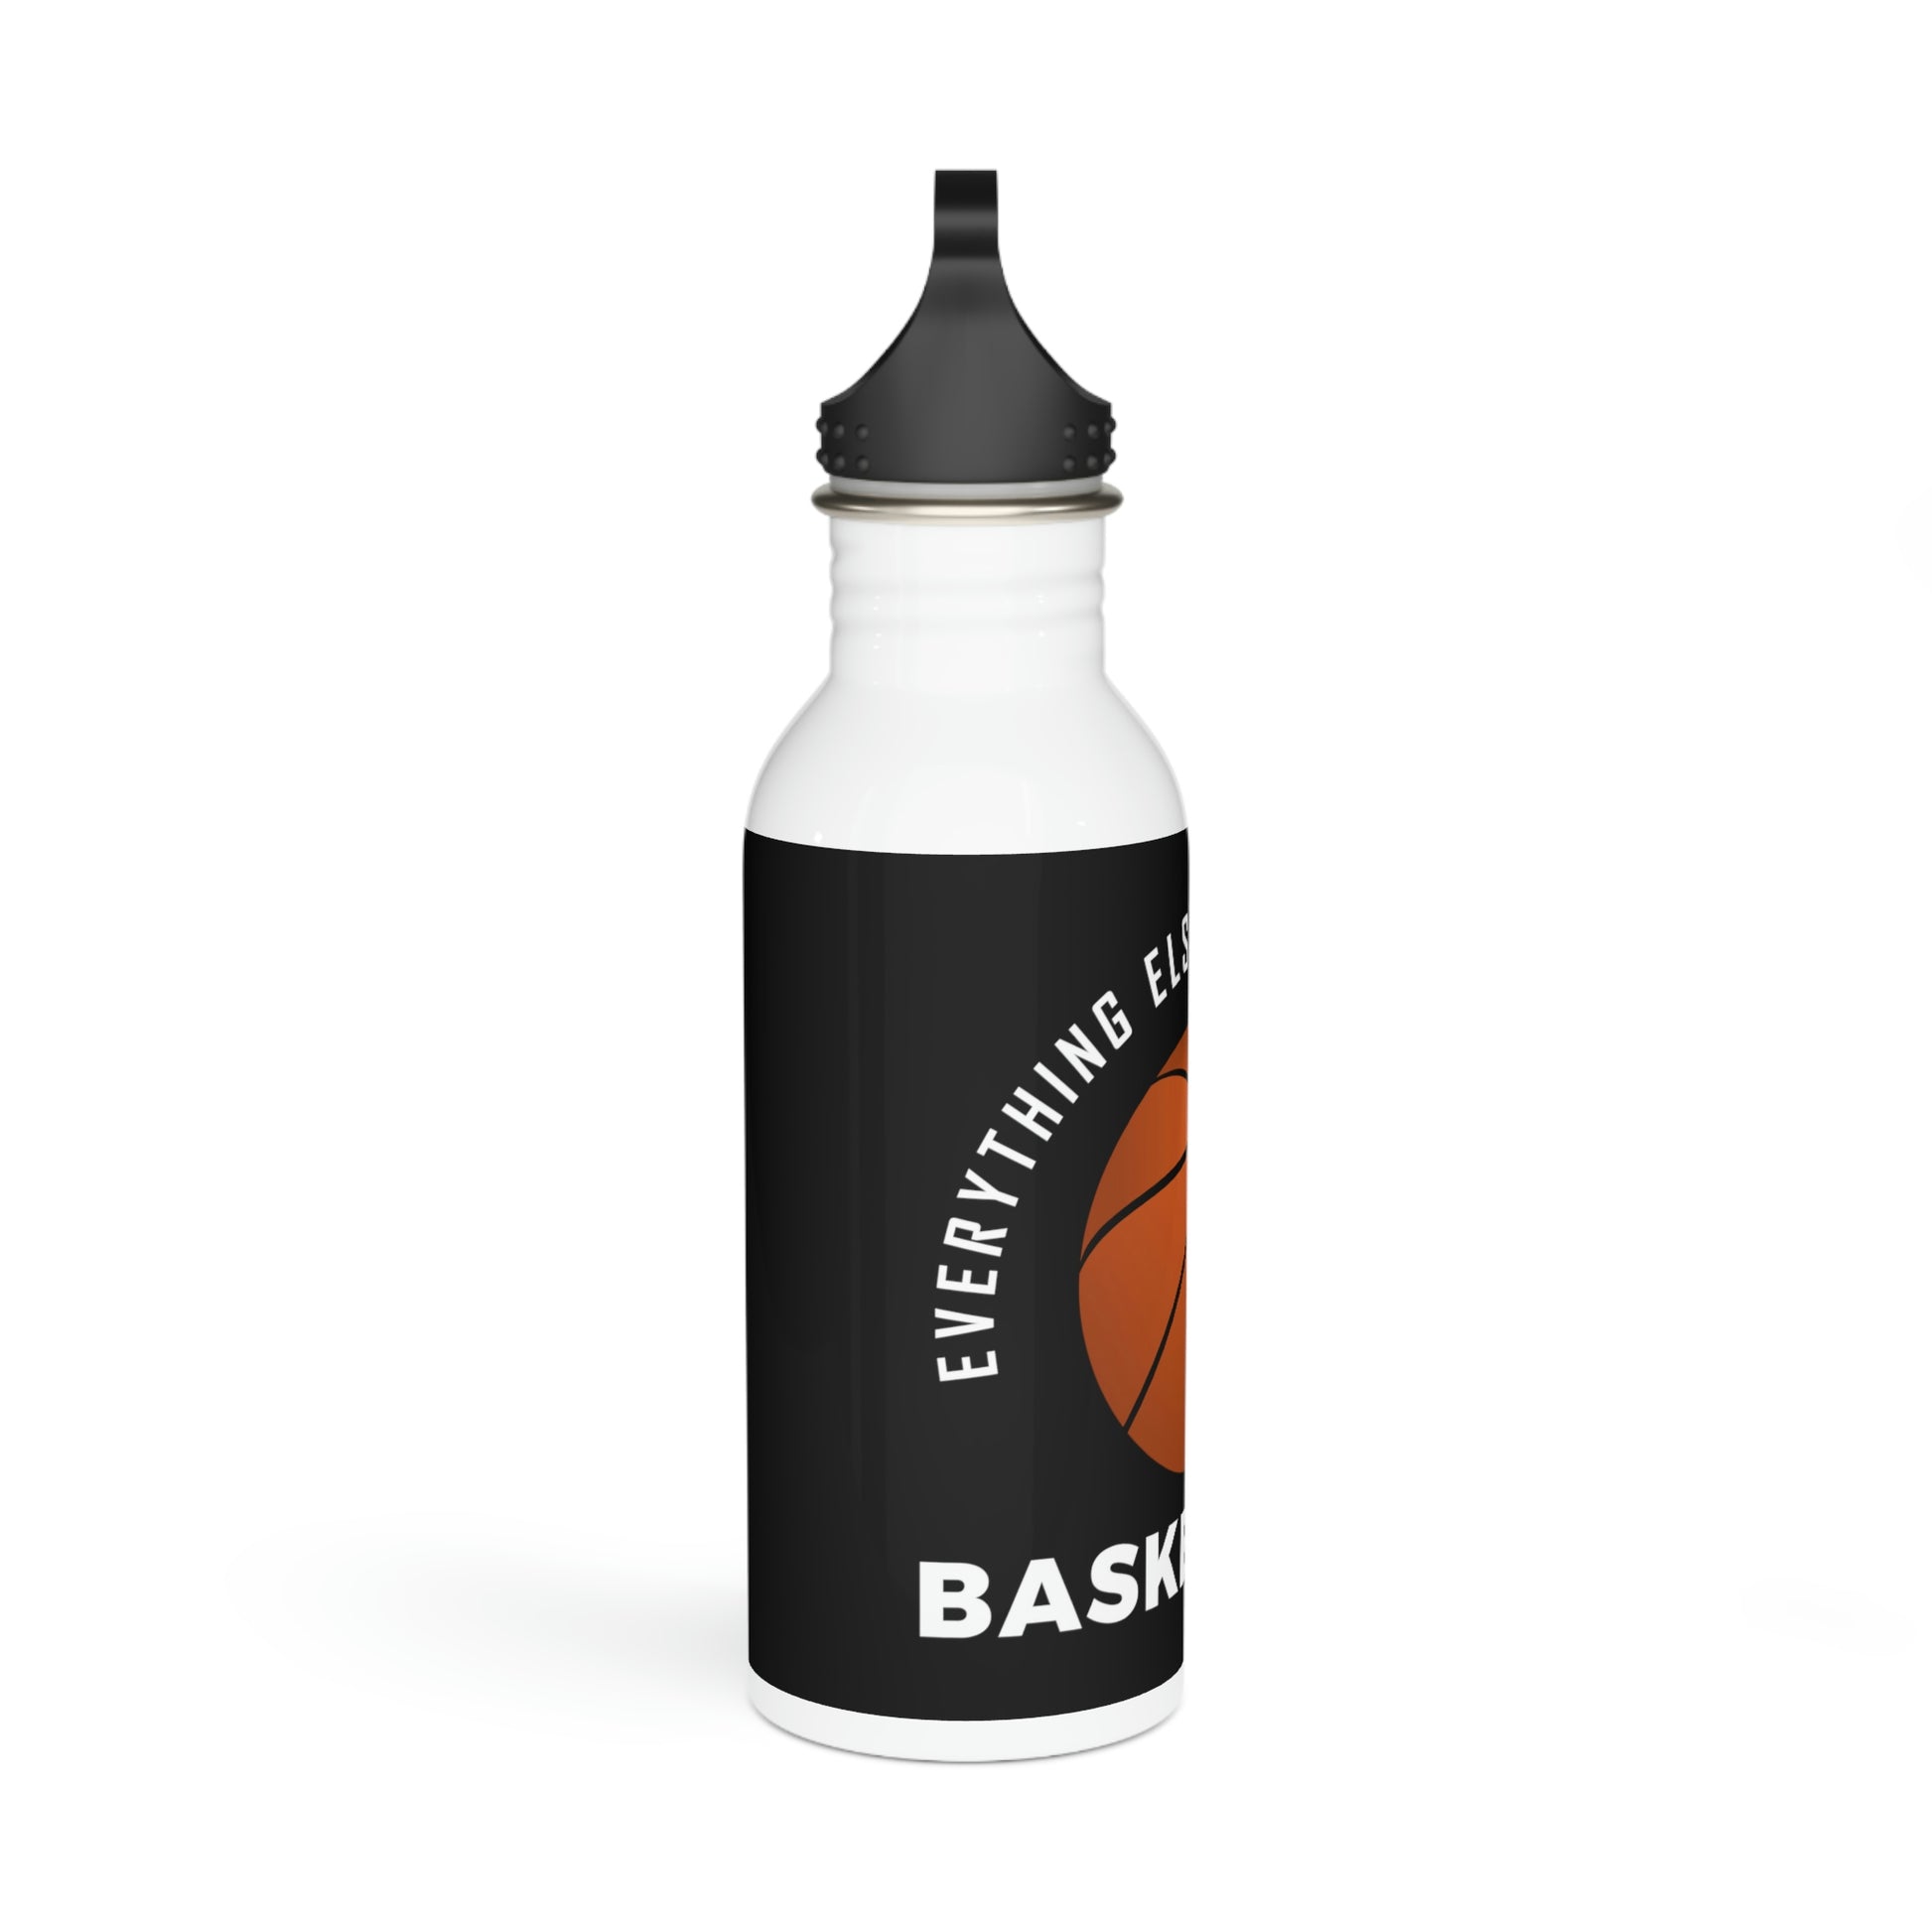 “Basketball, Everything Else Is Just A Game” Stainless Steel Bottle - Weave Got Gifts - Unique Gifts You Won’t Find Anywhere Else!